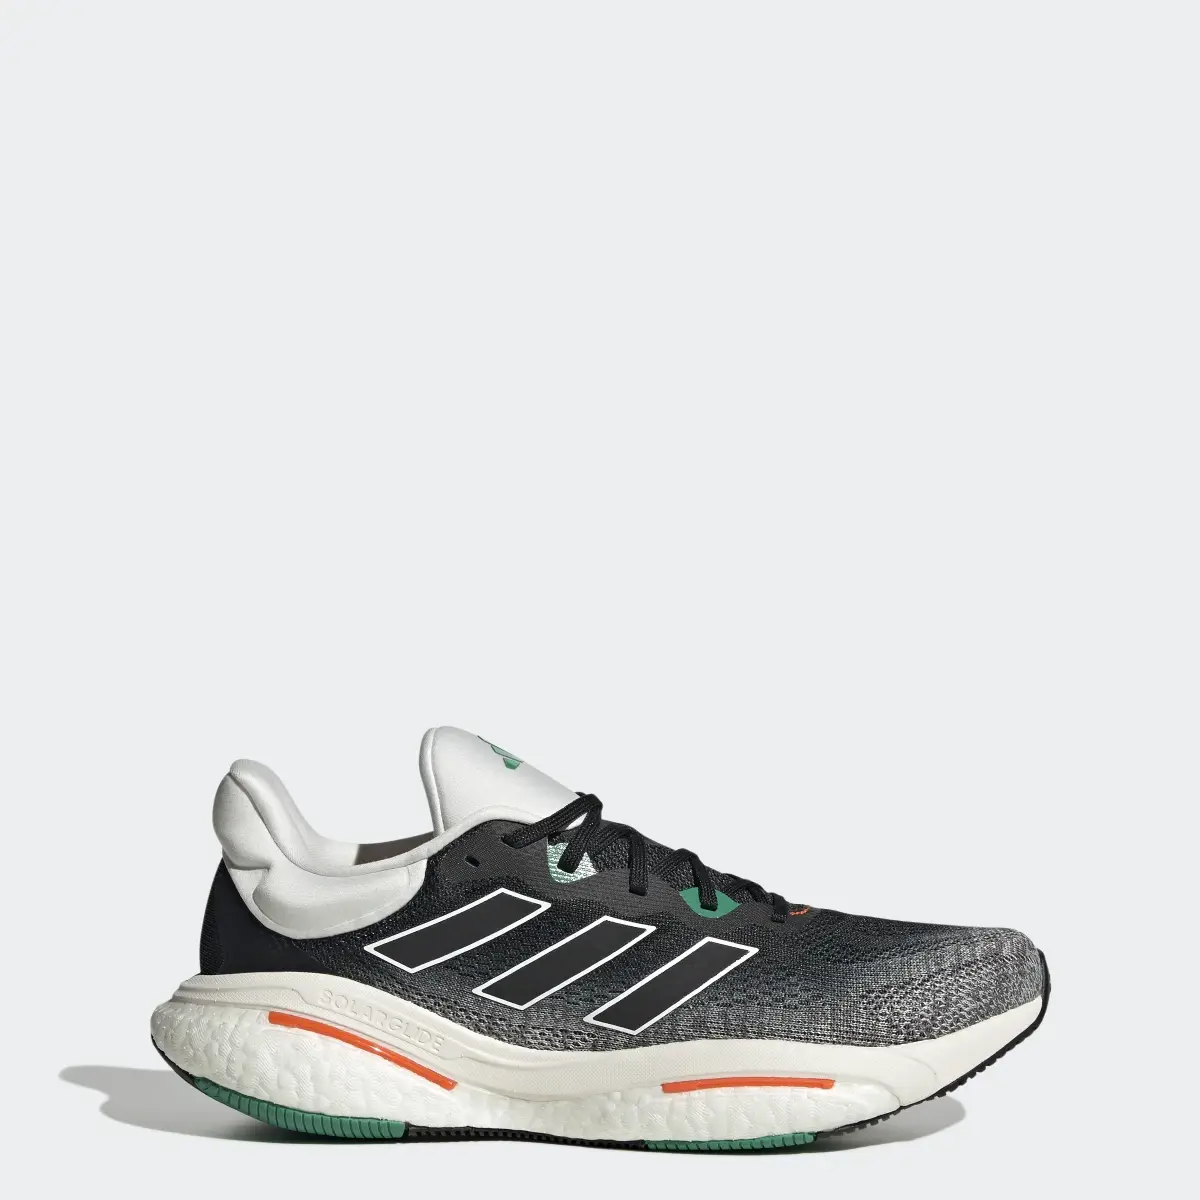 Adidas Solarglide 6 Shoes. 1